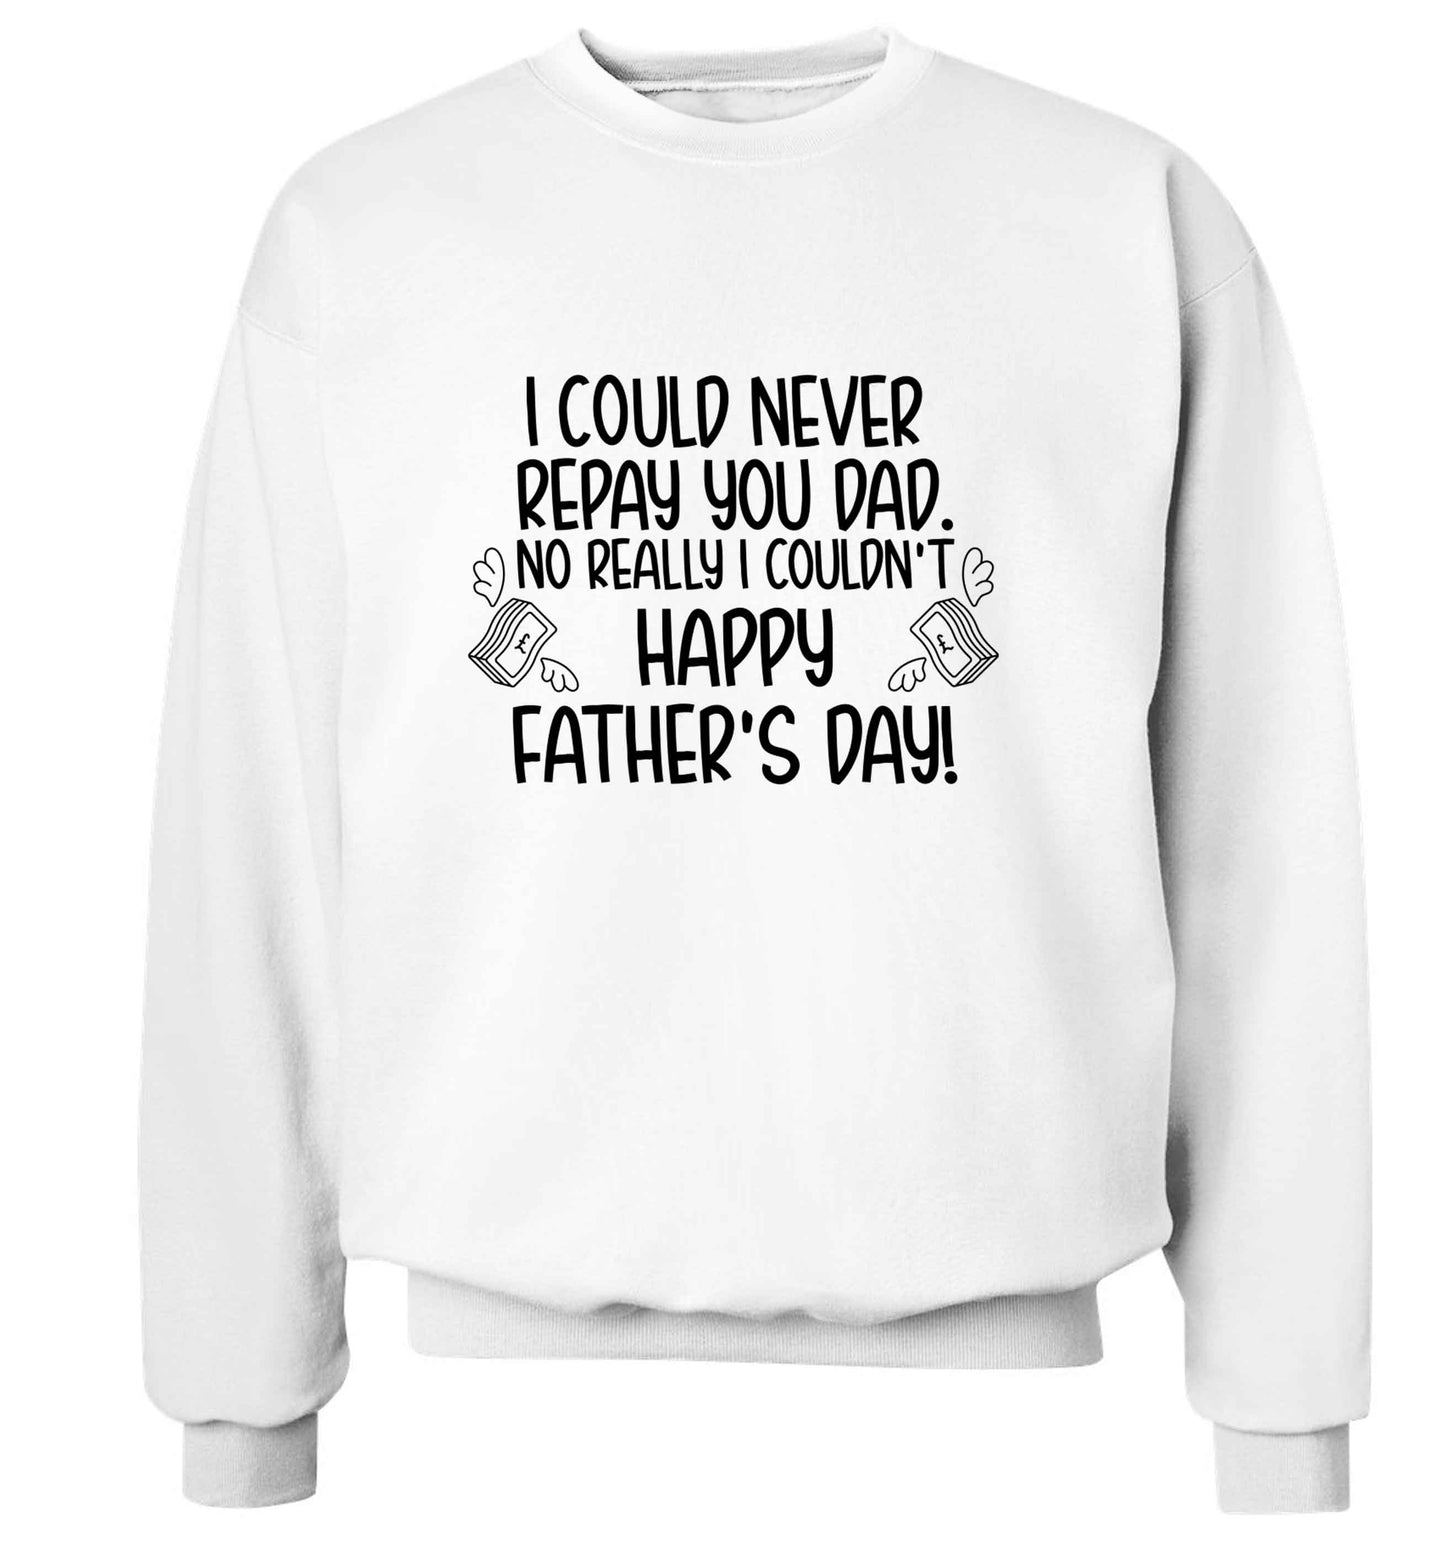 I could never repay you dad. No I really couldn't happy Father's day! adult's unisex white sweater 2XL